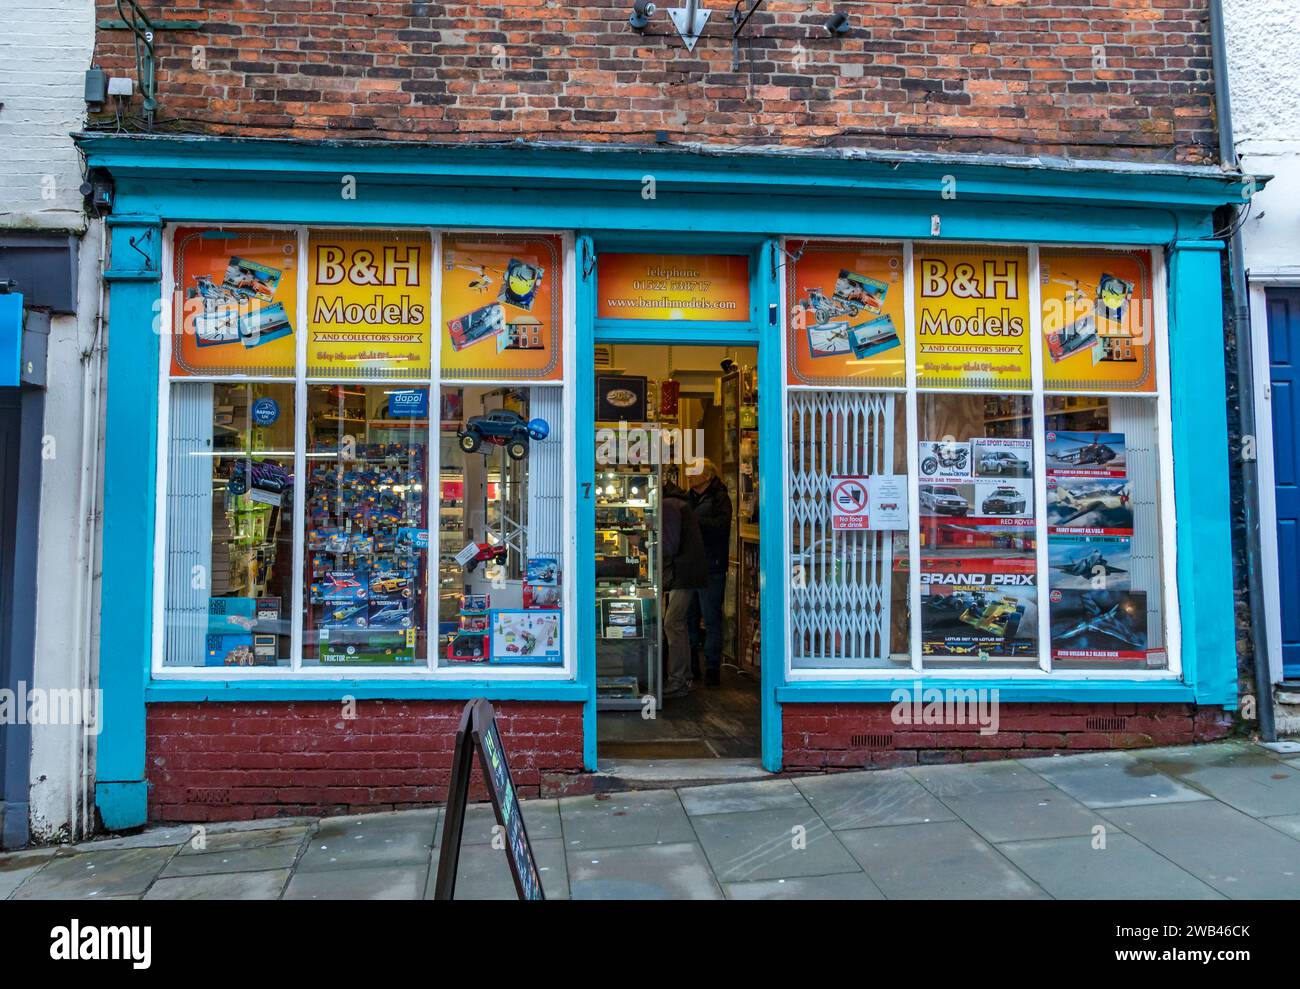 B&H Models and Collectors Shop, The Strait, Lincoln City, Lincolnshire, England, UK Stockfoto